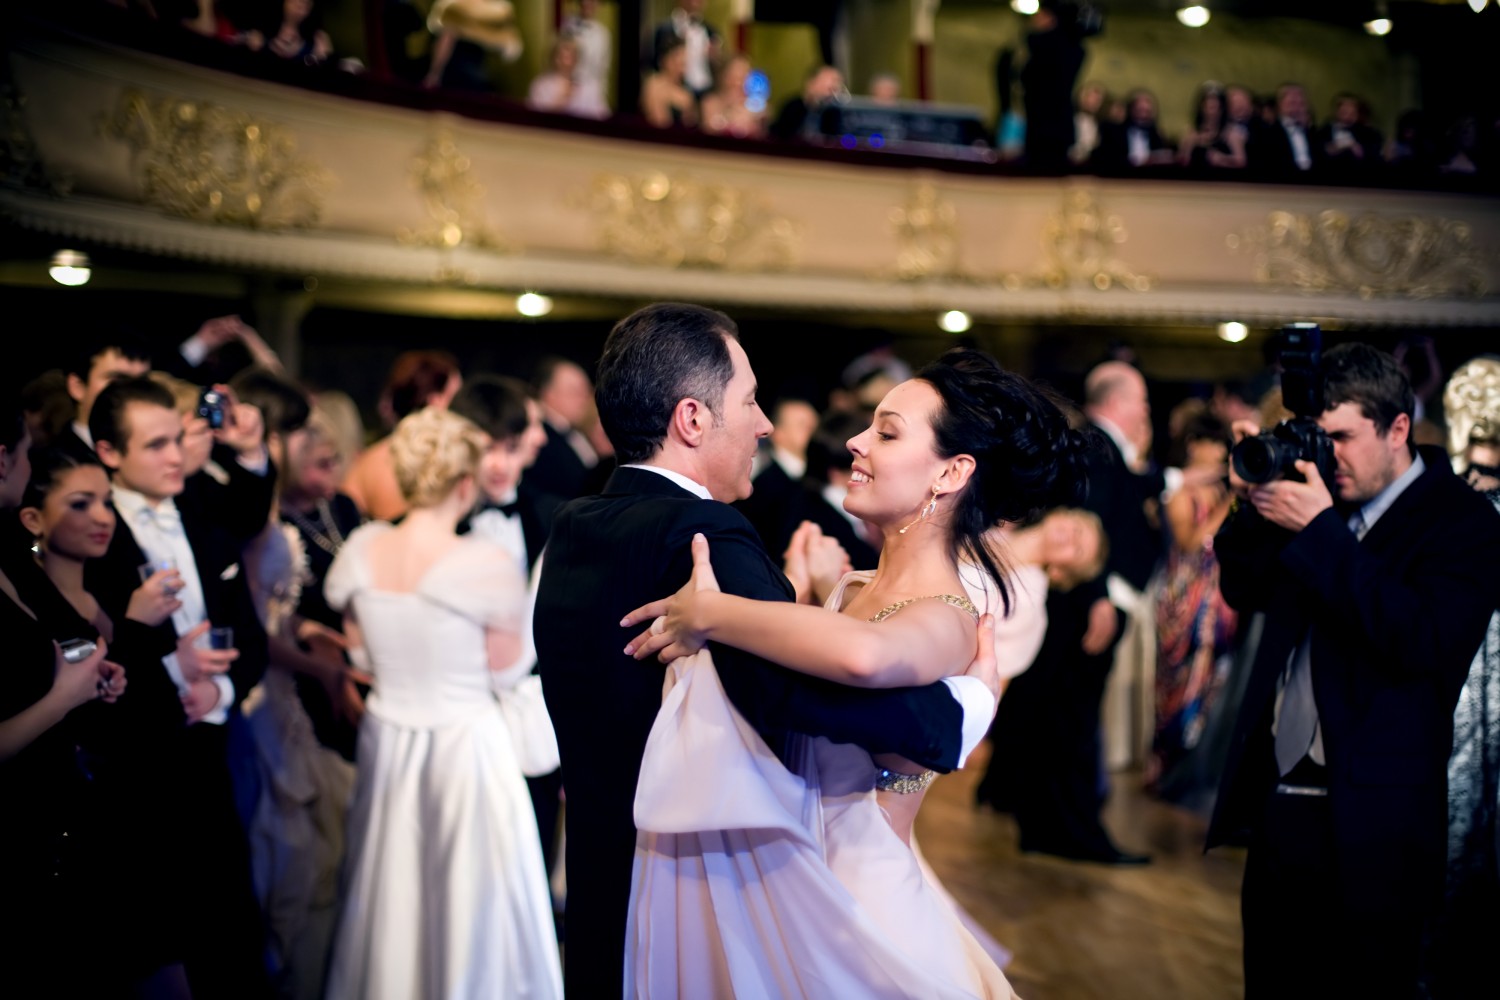 Experience the elegance and tradition of Vienna's Ball Season:  A visit you'll never forget!